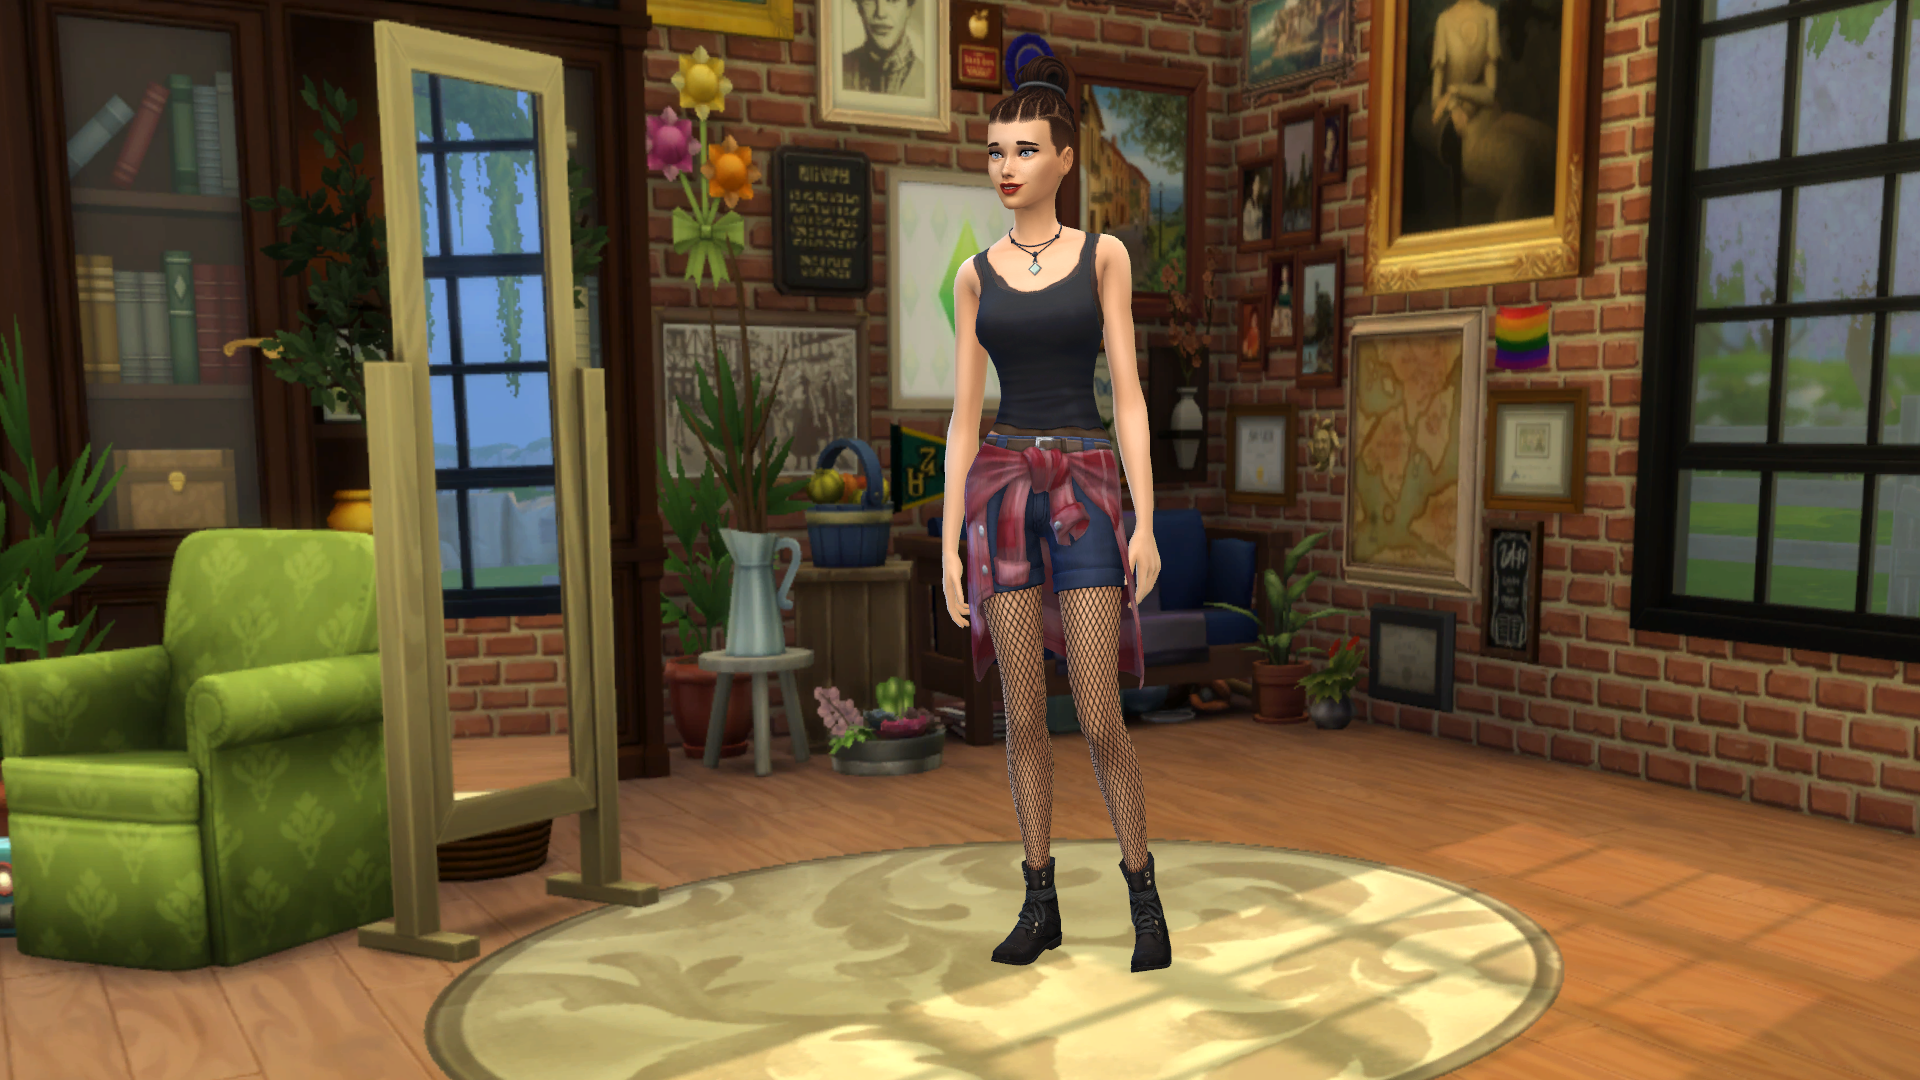 Mod The Sims - TS2 inspired CAS background for The Sims 4